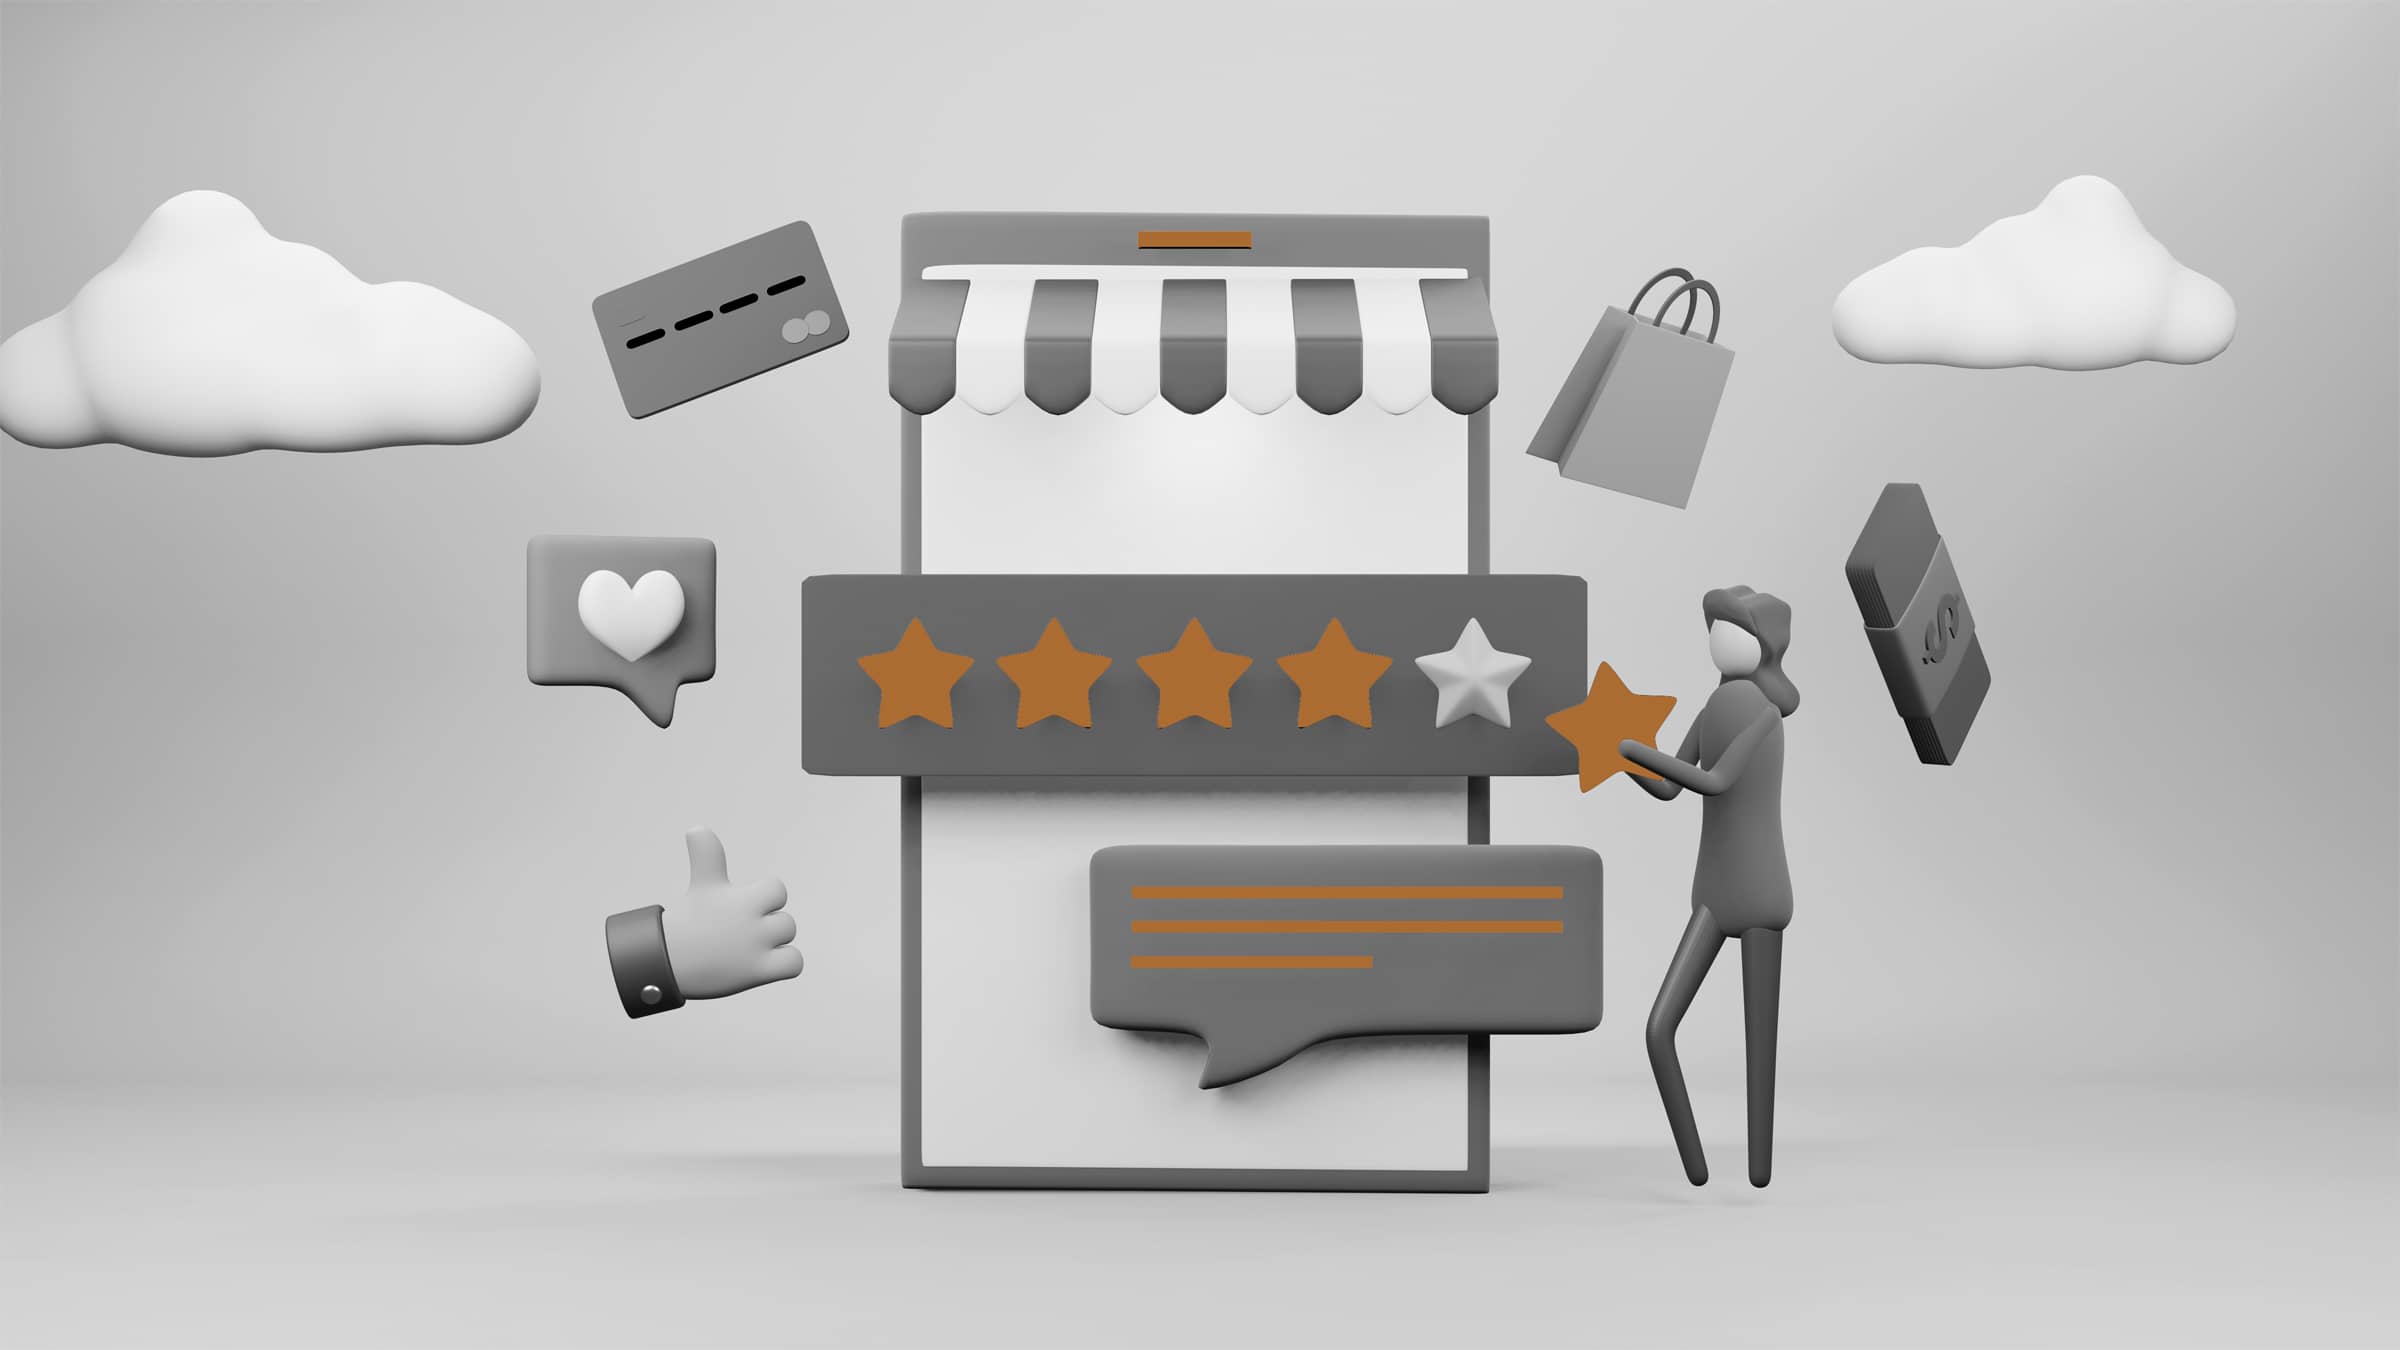 Does Responding To Reviews Help SEO?